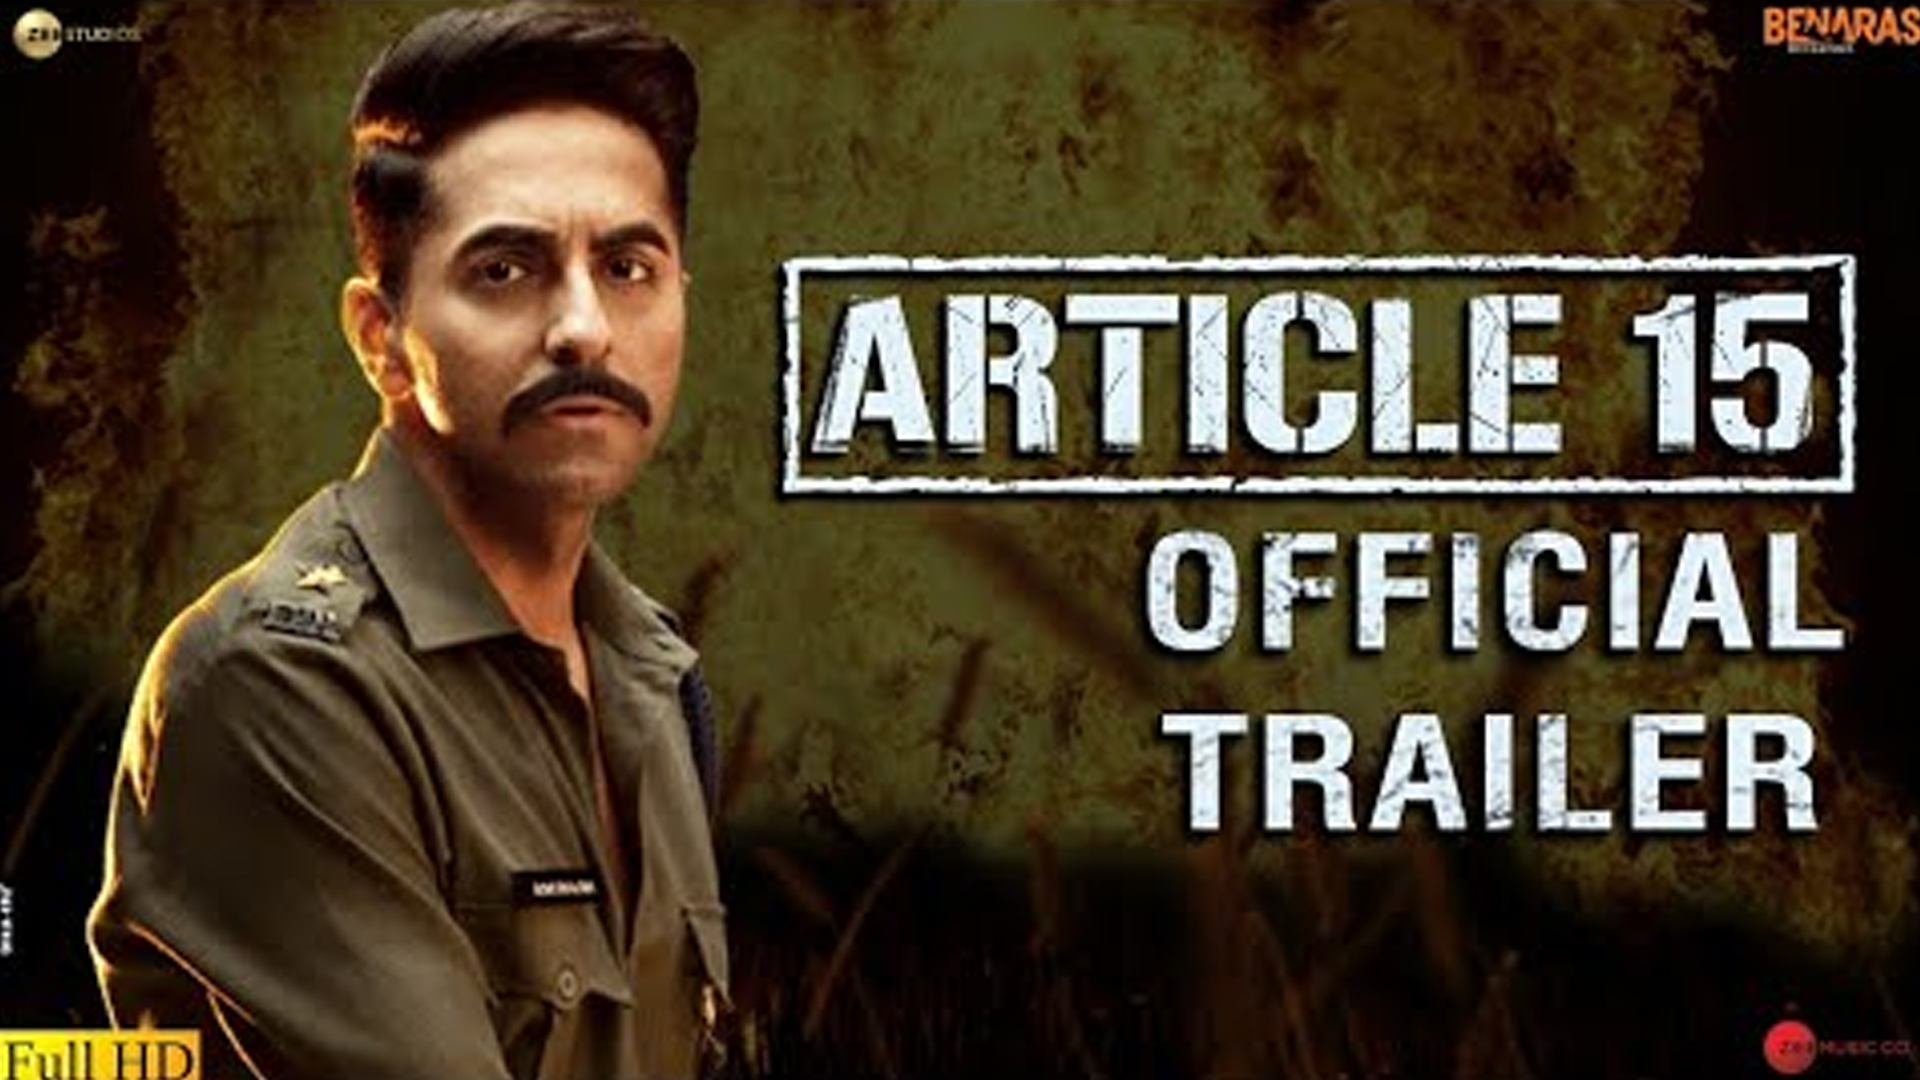 Trailer of Article 15 starring Ayushmann Khurrana promises a thrilling investigation which reveals disturbing facts